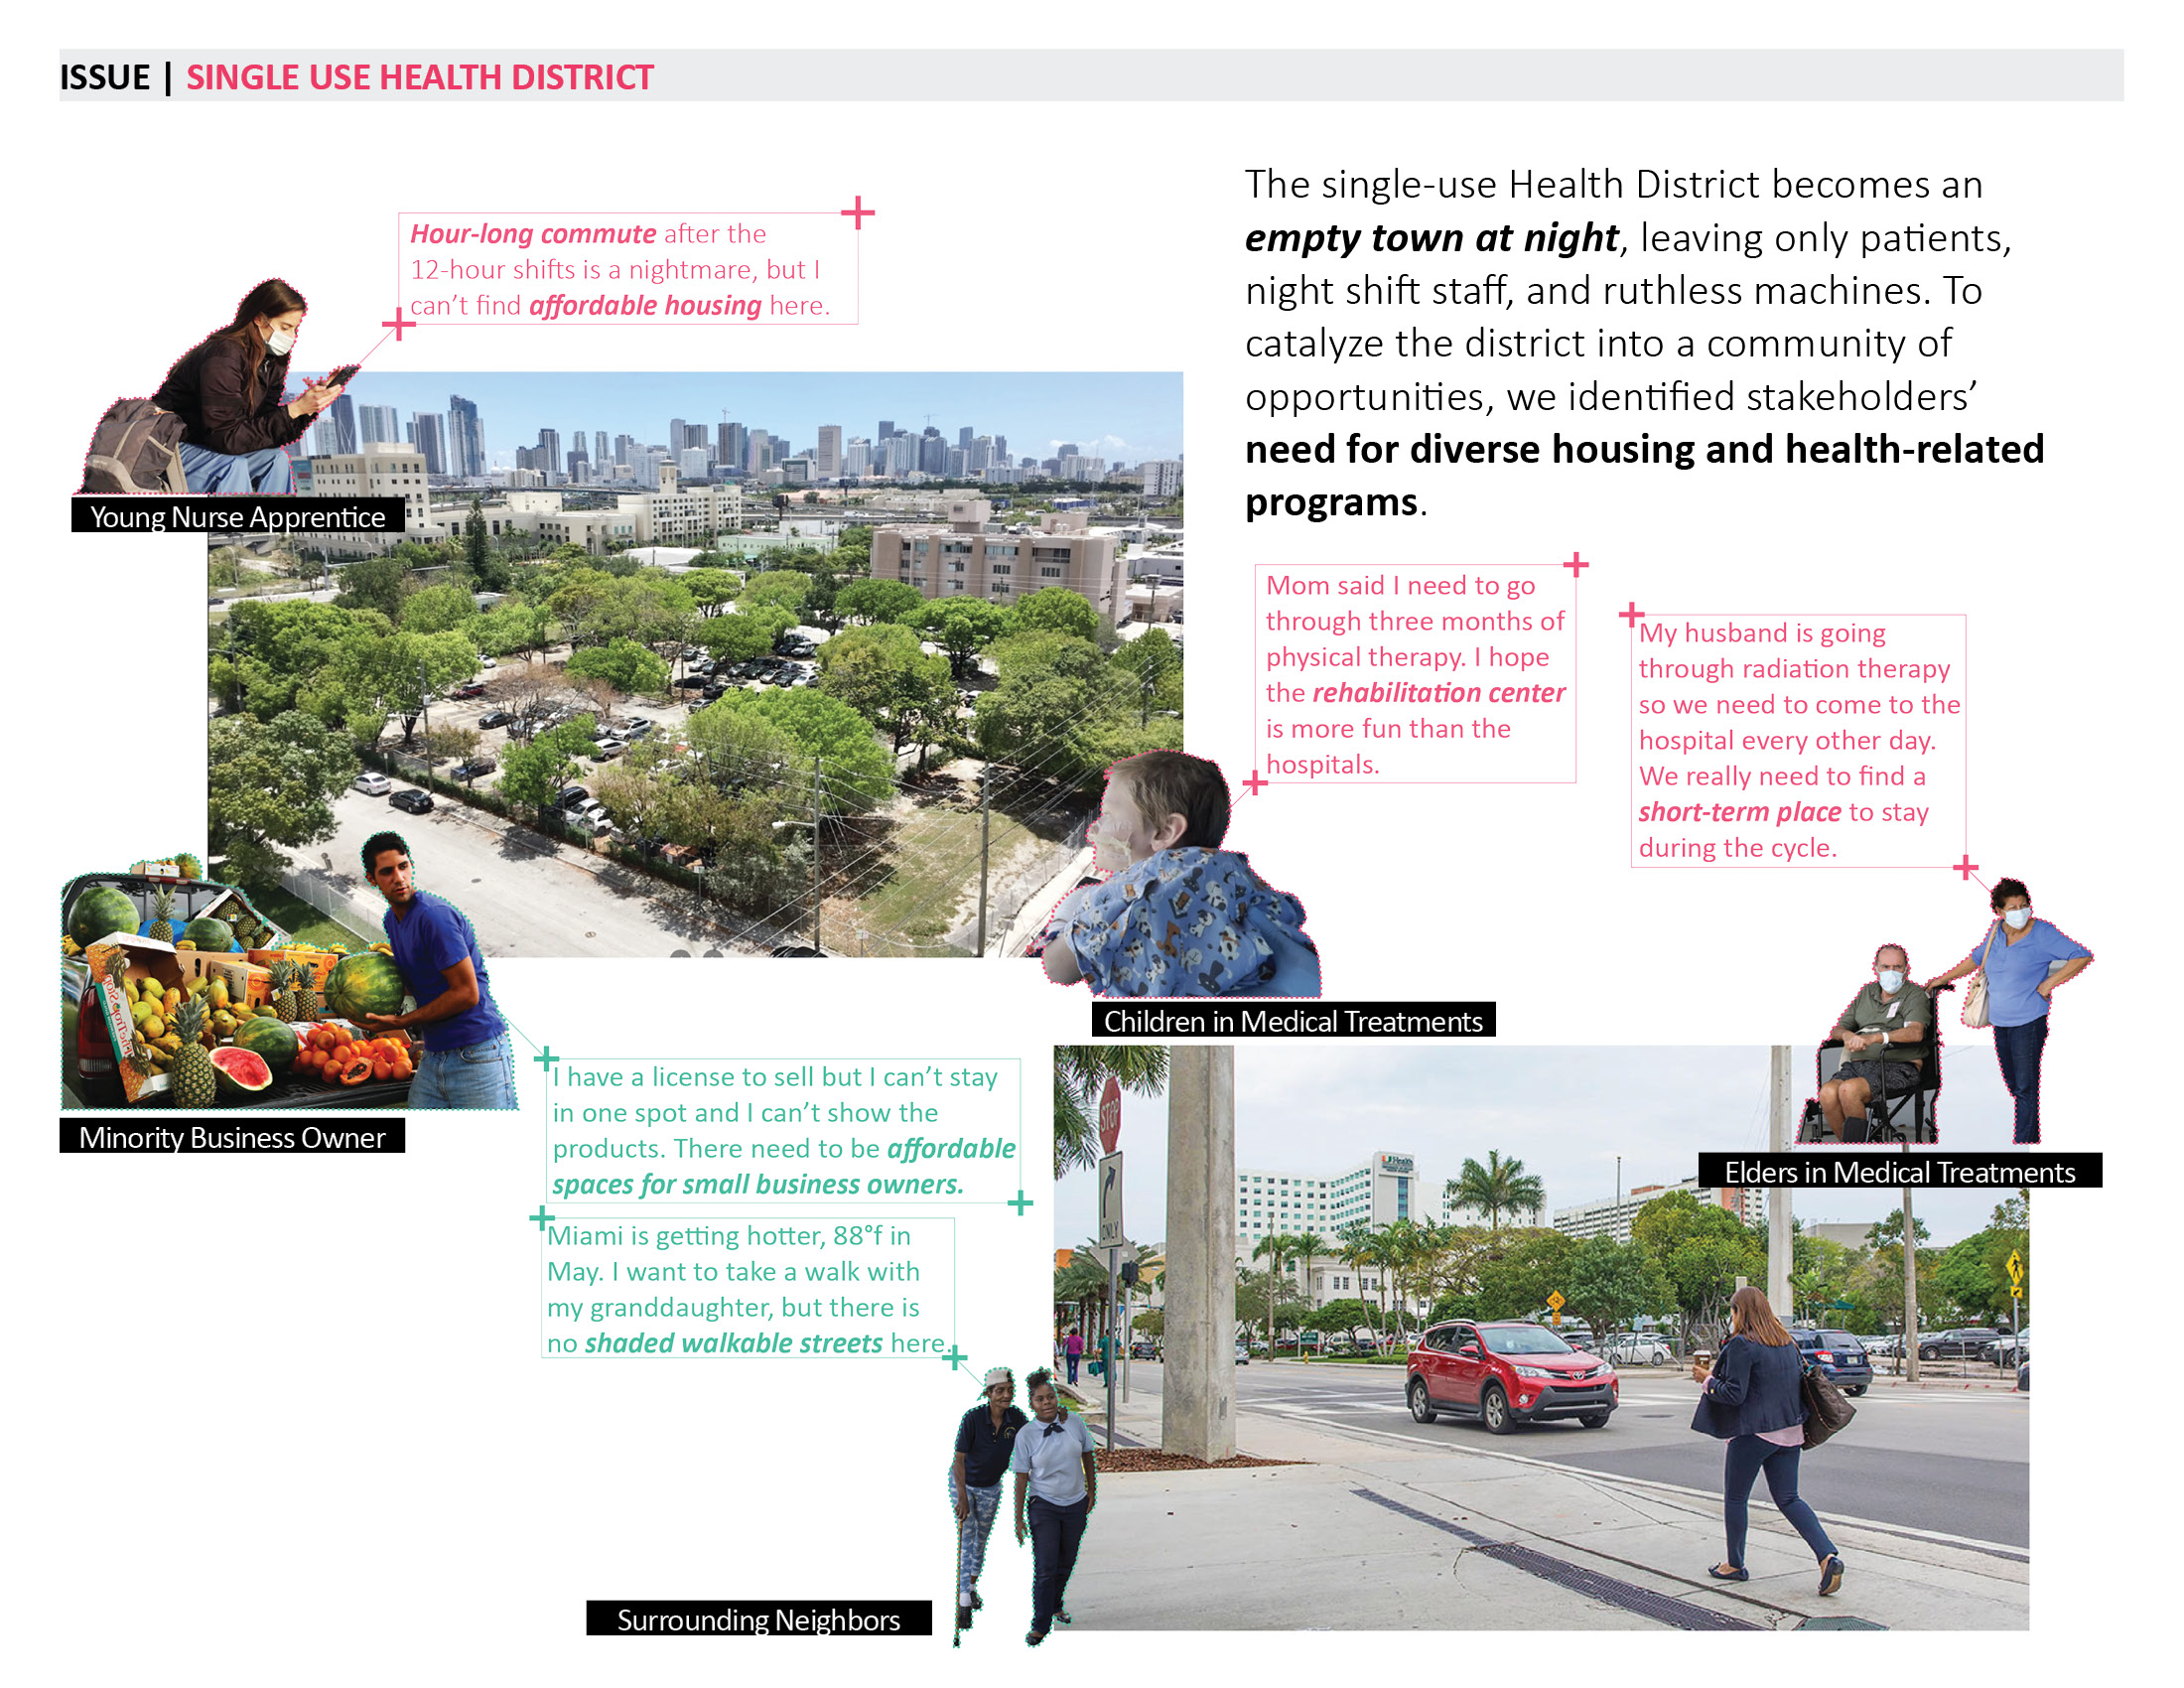 infographic illustrating the previous concerns of the neighborhood which include long commutes for workers and lack of affordable housing and healthy foods